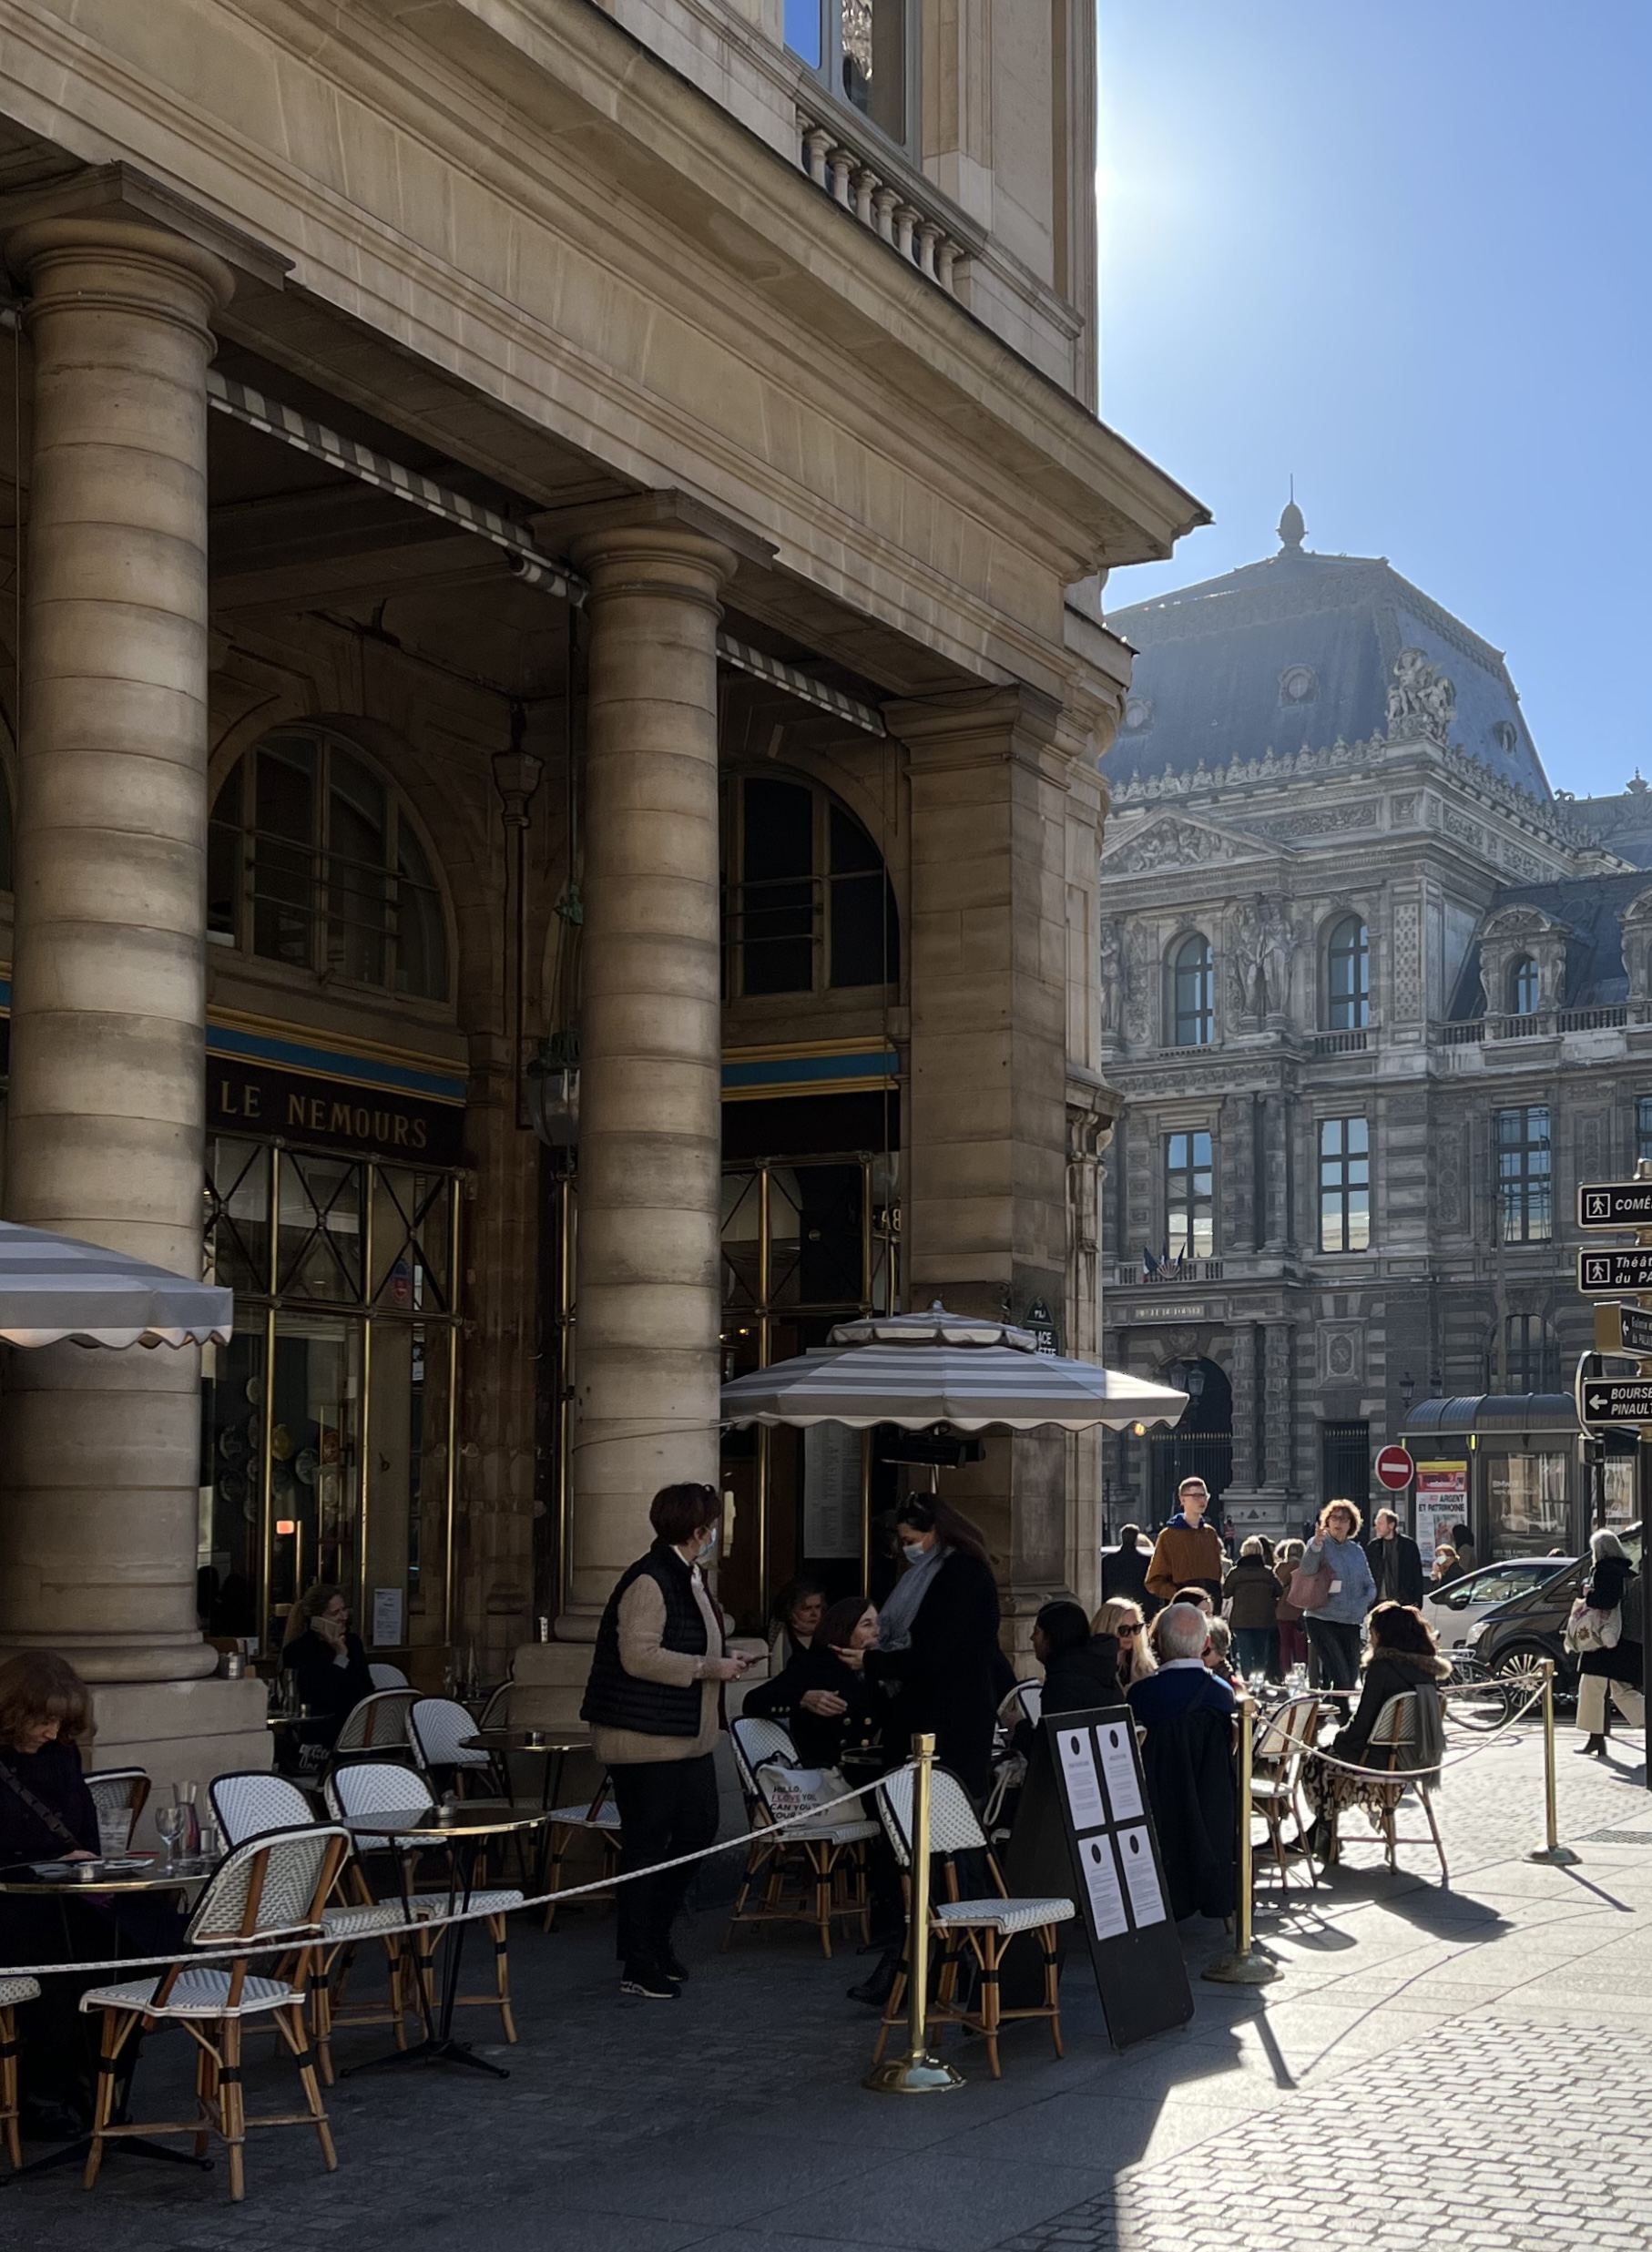 Le Nemours cafe - another must on the list of the prettiest cafes in Paris